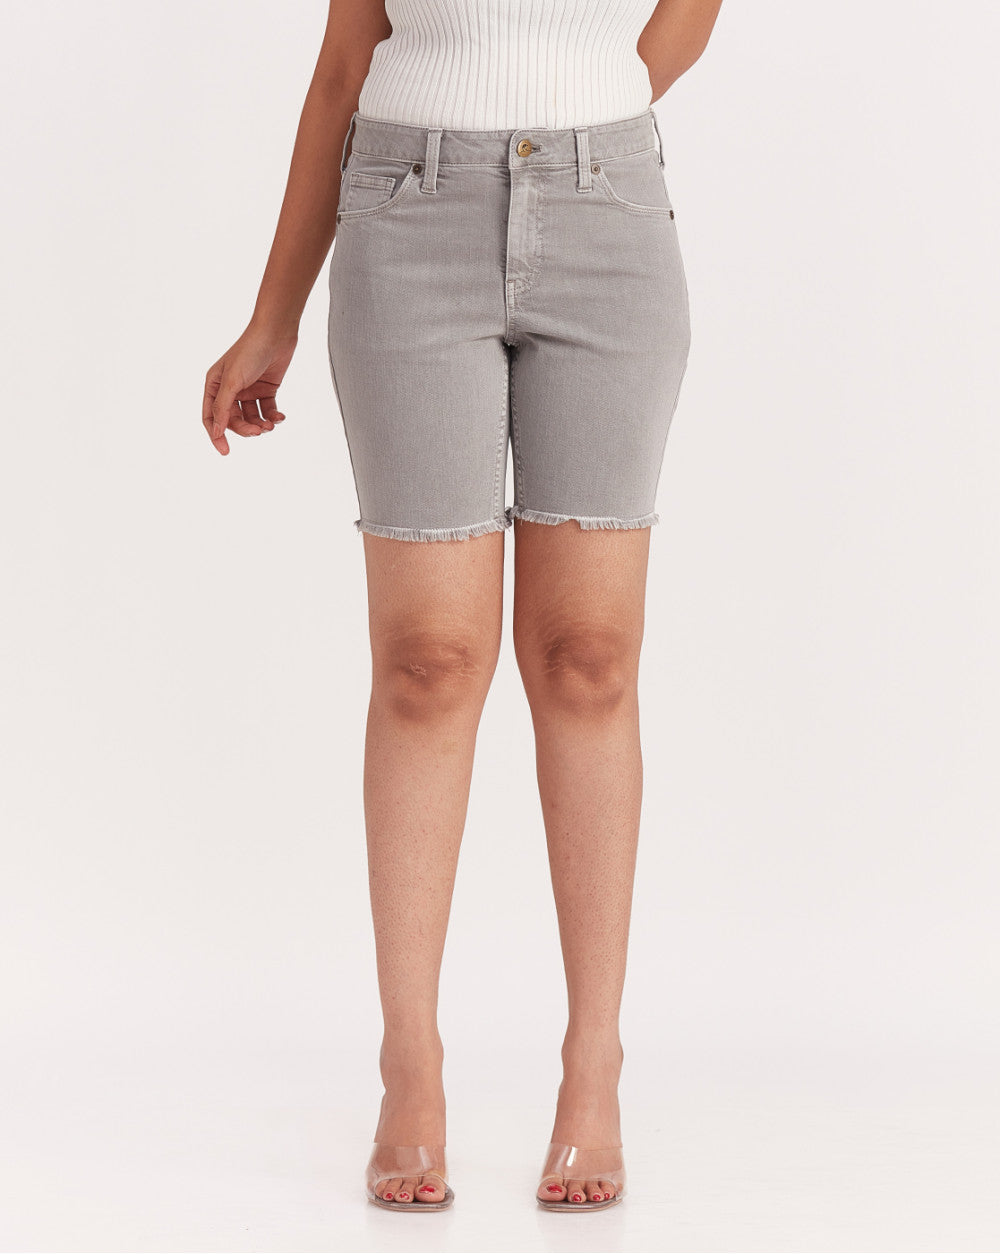 Mid Rise Colored Shorts - Soft Grey